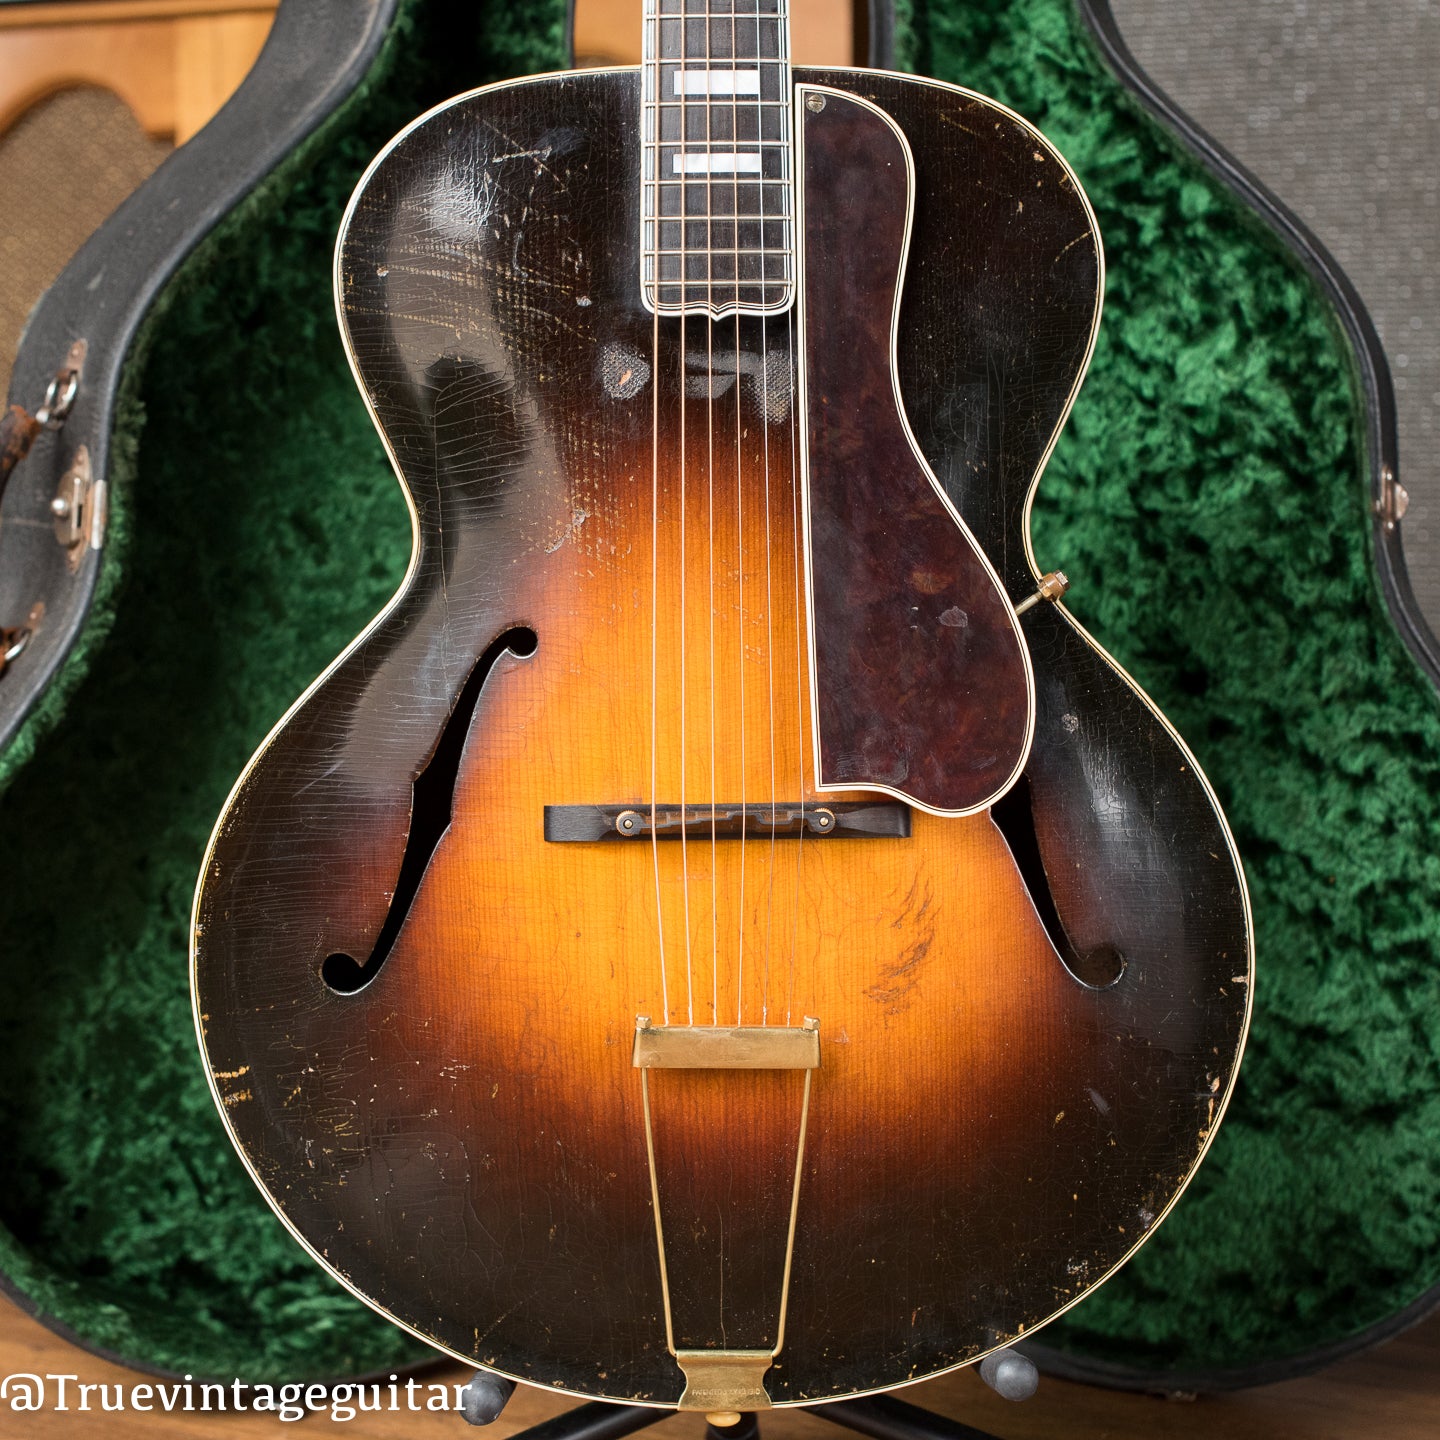 1931 Gibson L-5, 16", archtop